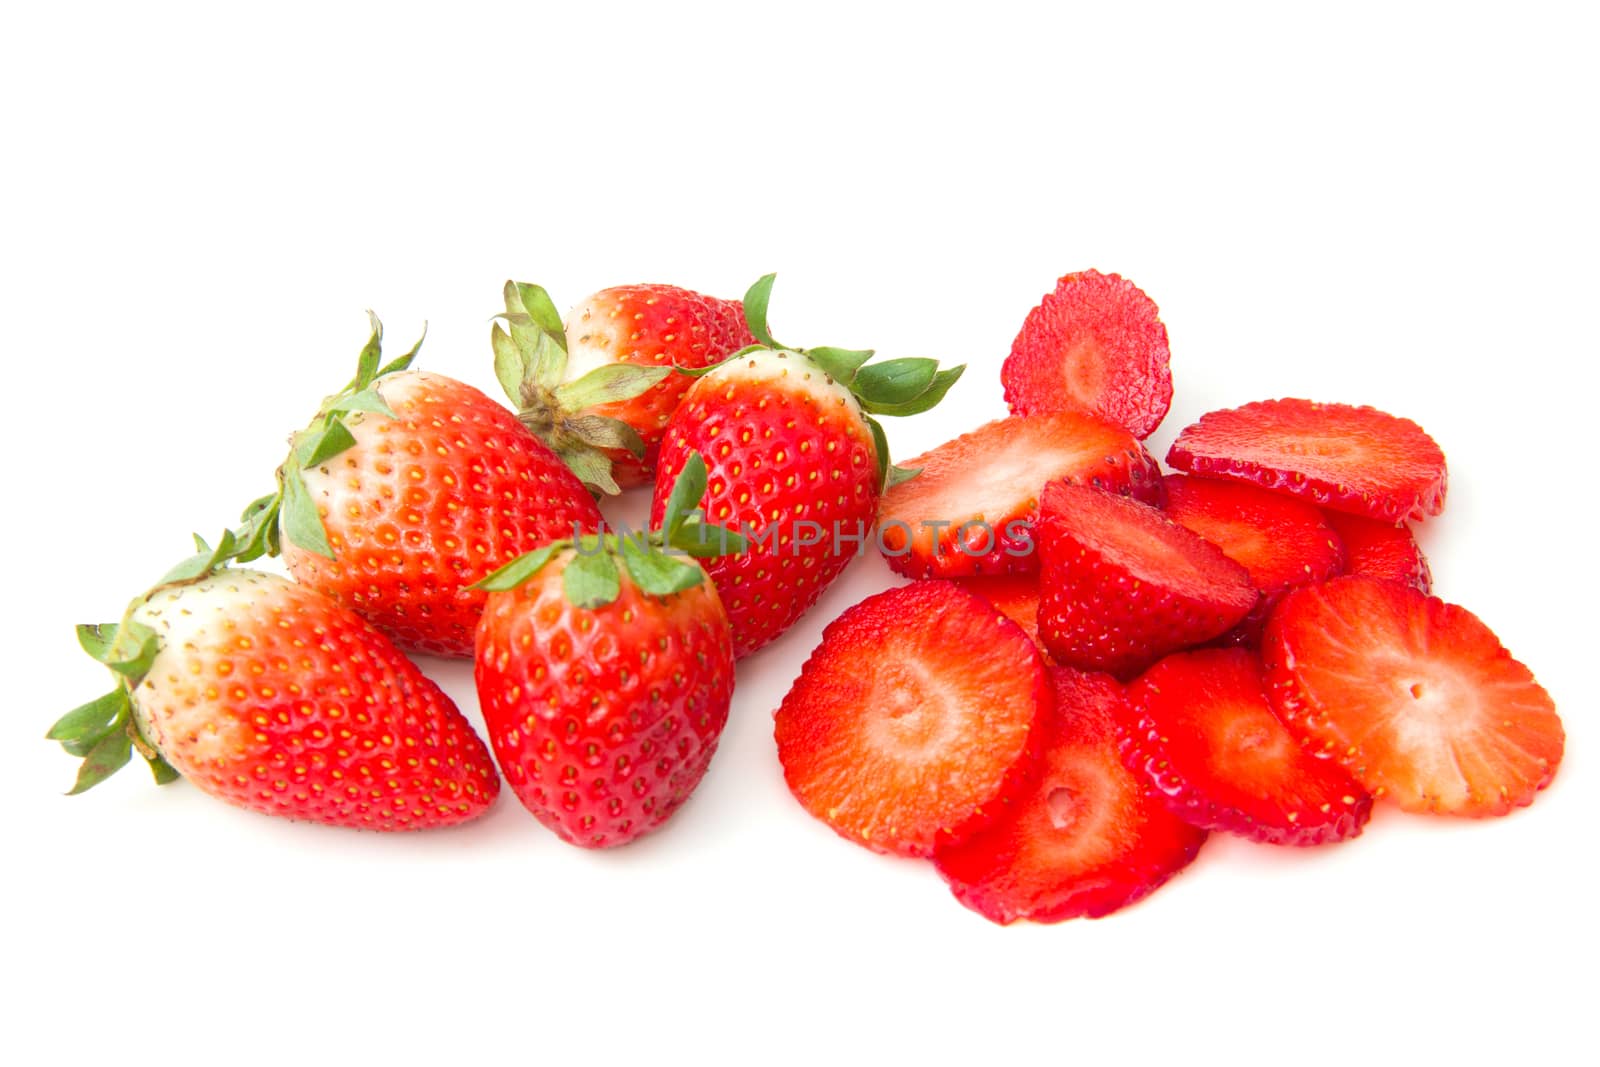 Sliced strawberries on a white background